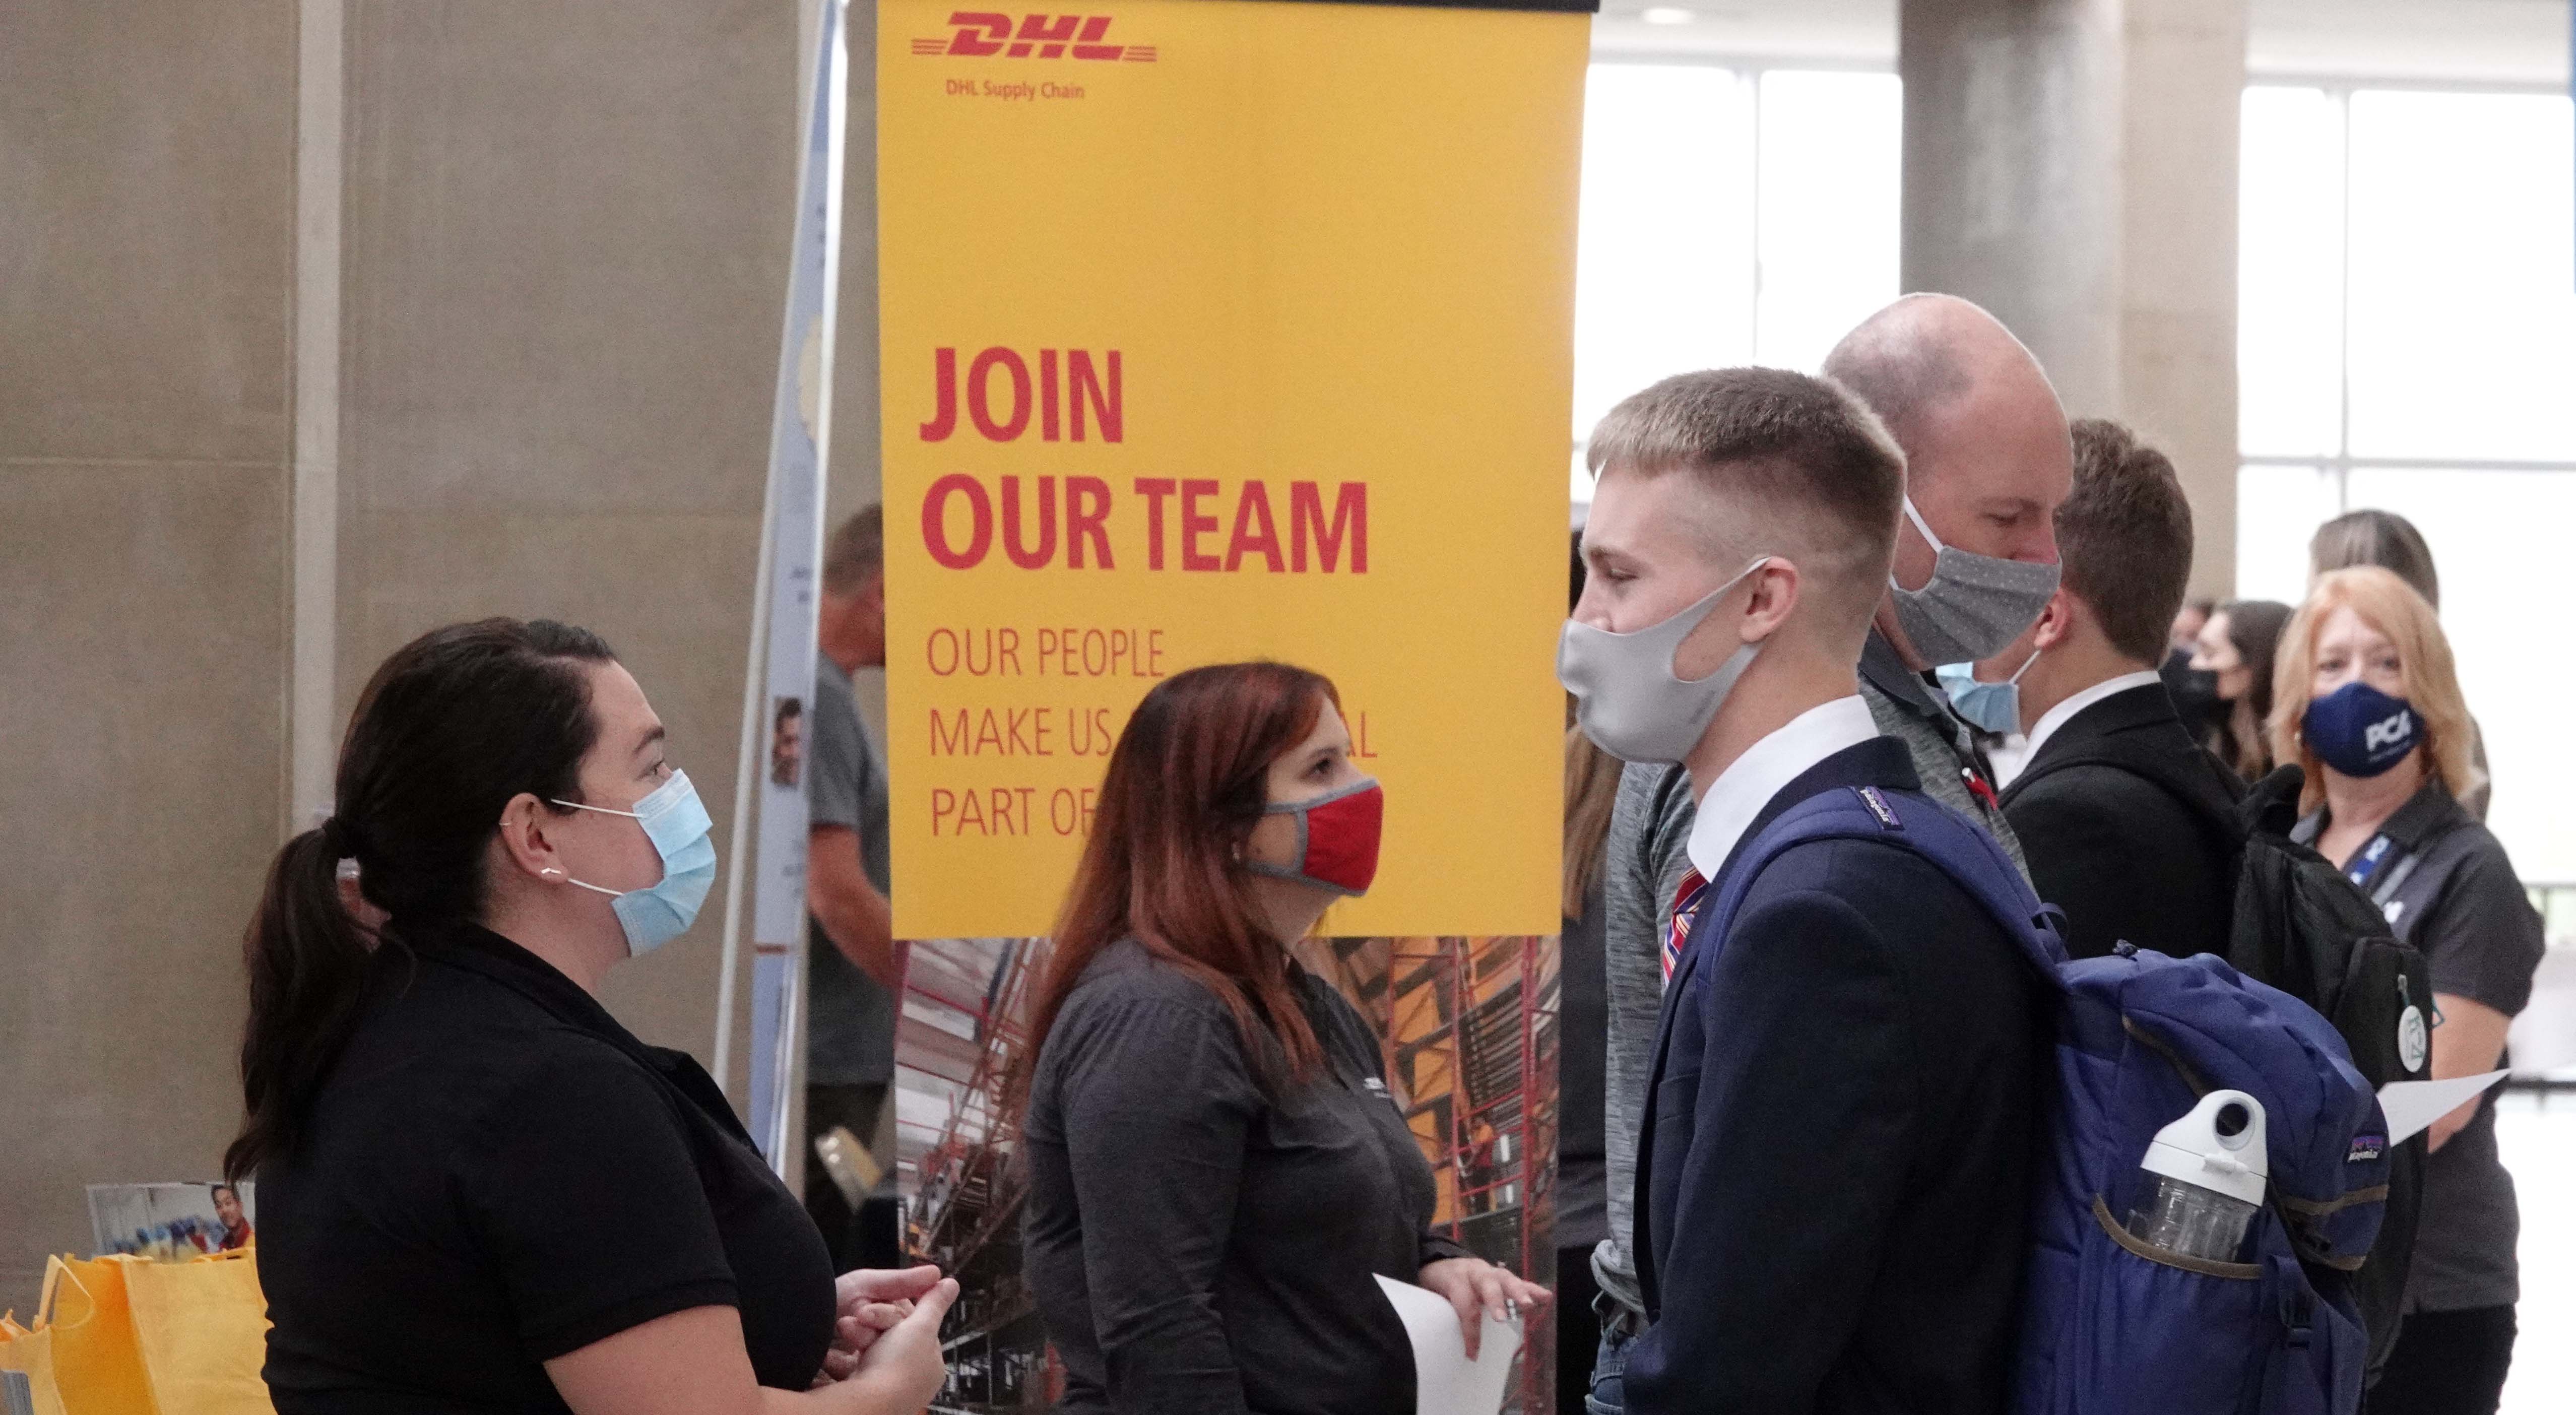 Recruiter and student talk at DHL booth